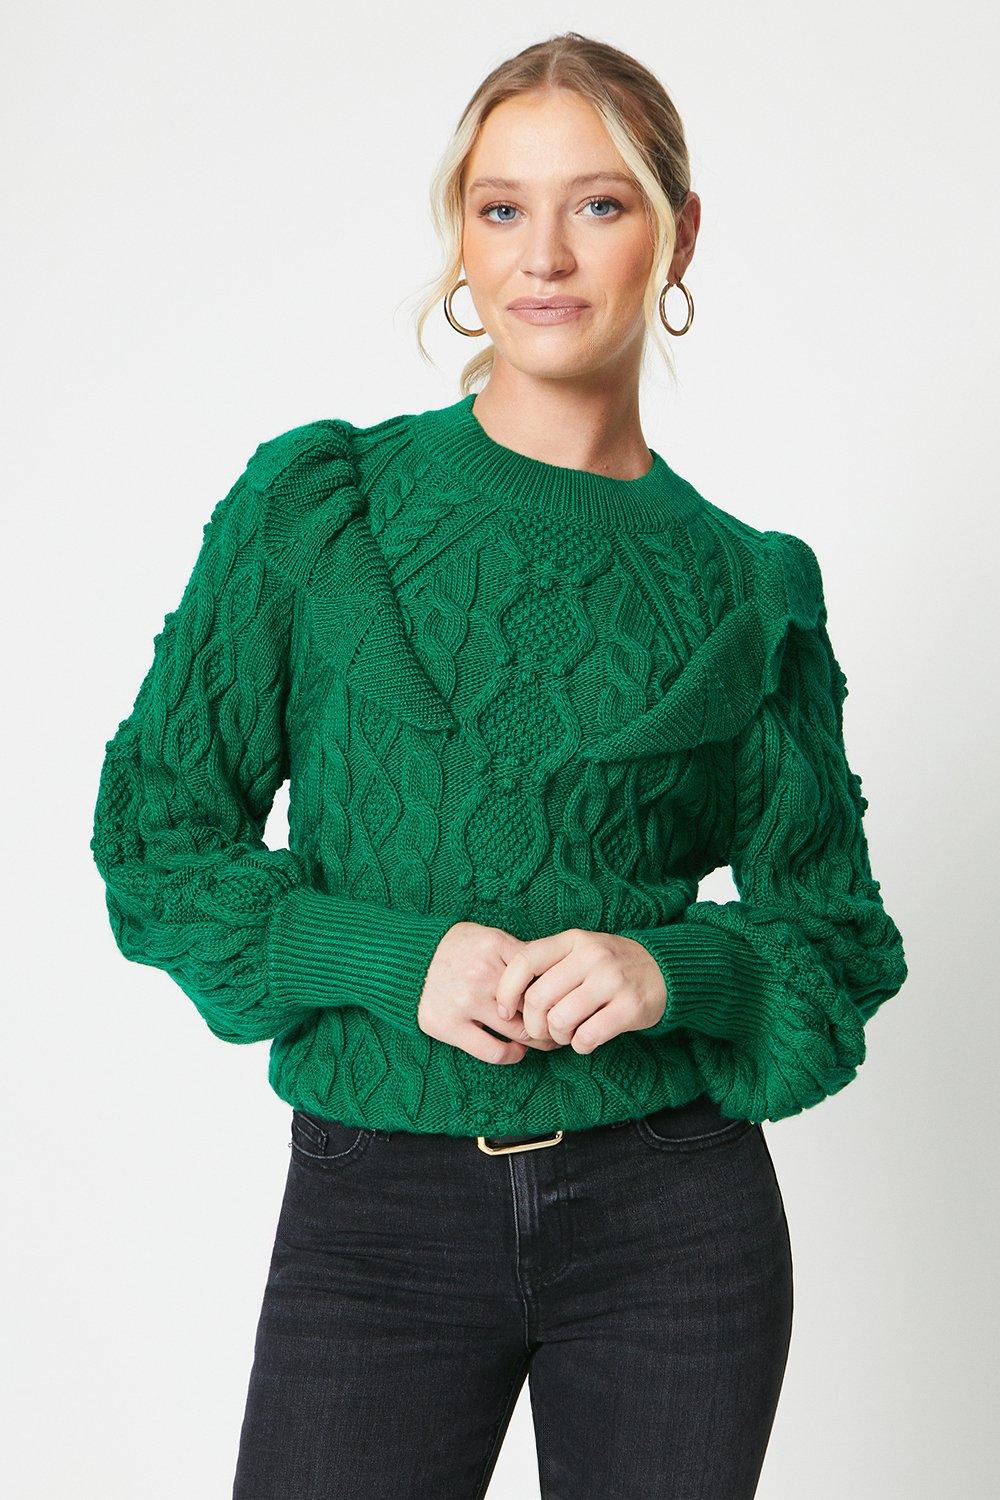 Women's Ruffle Cable Knit Bobble Jumper - green - S